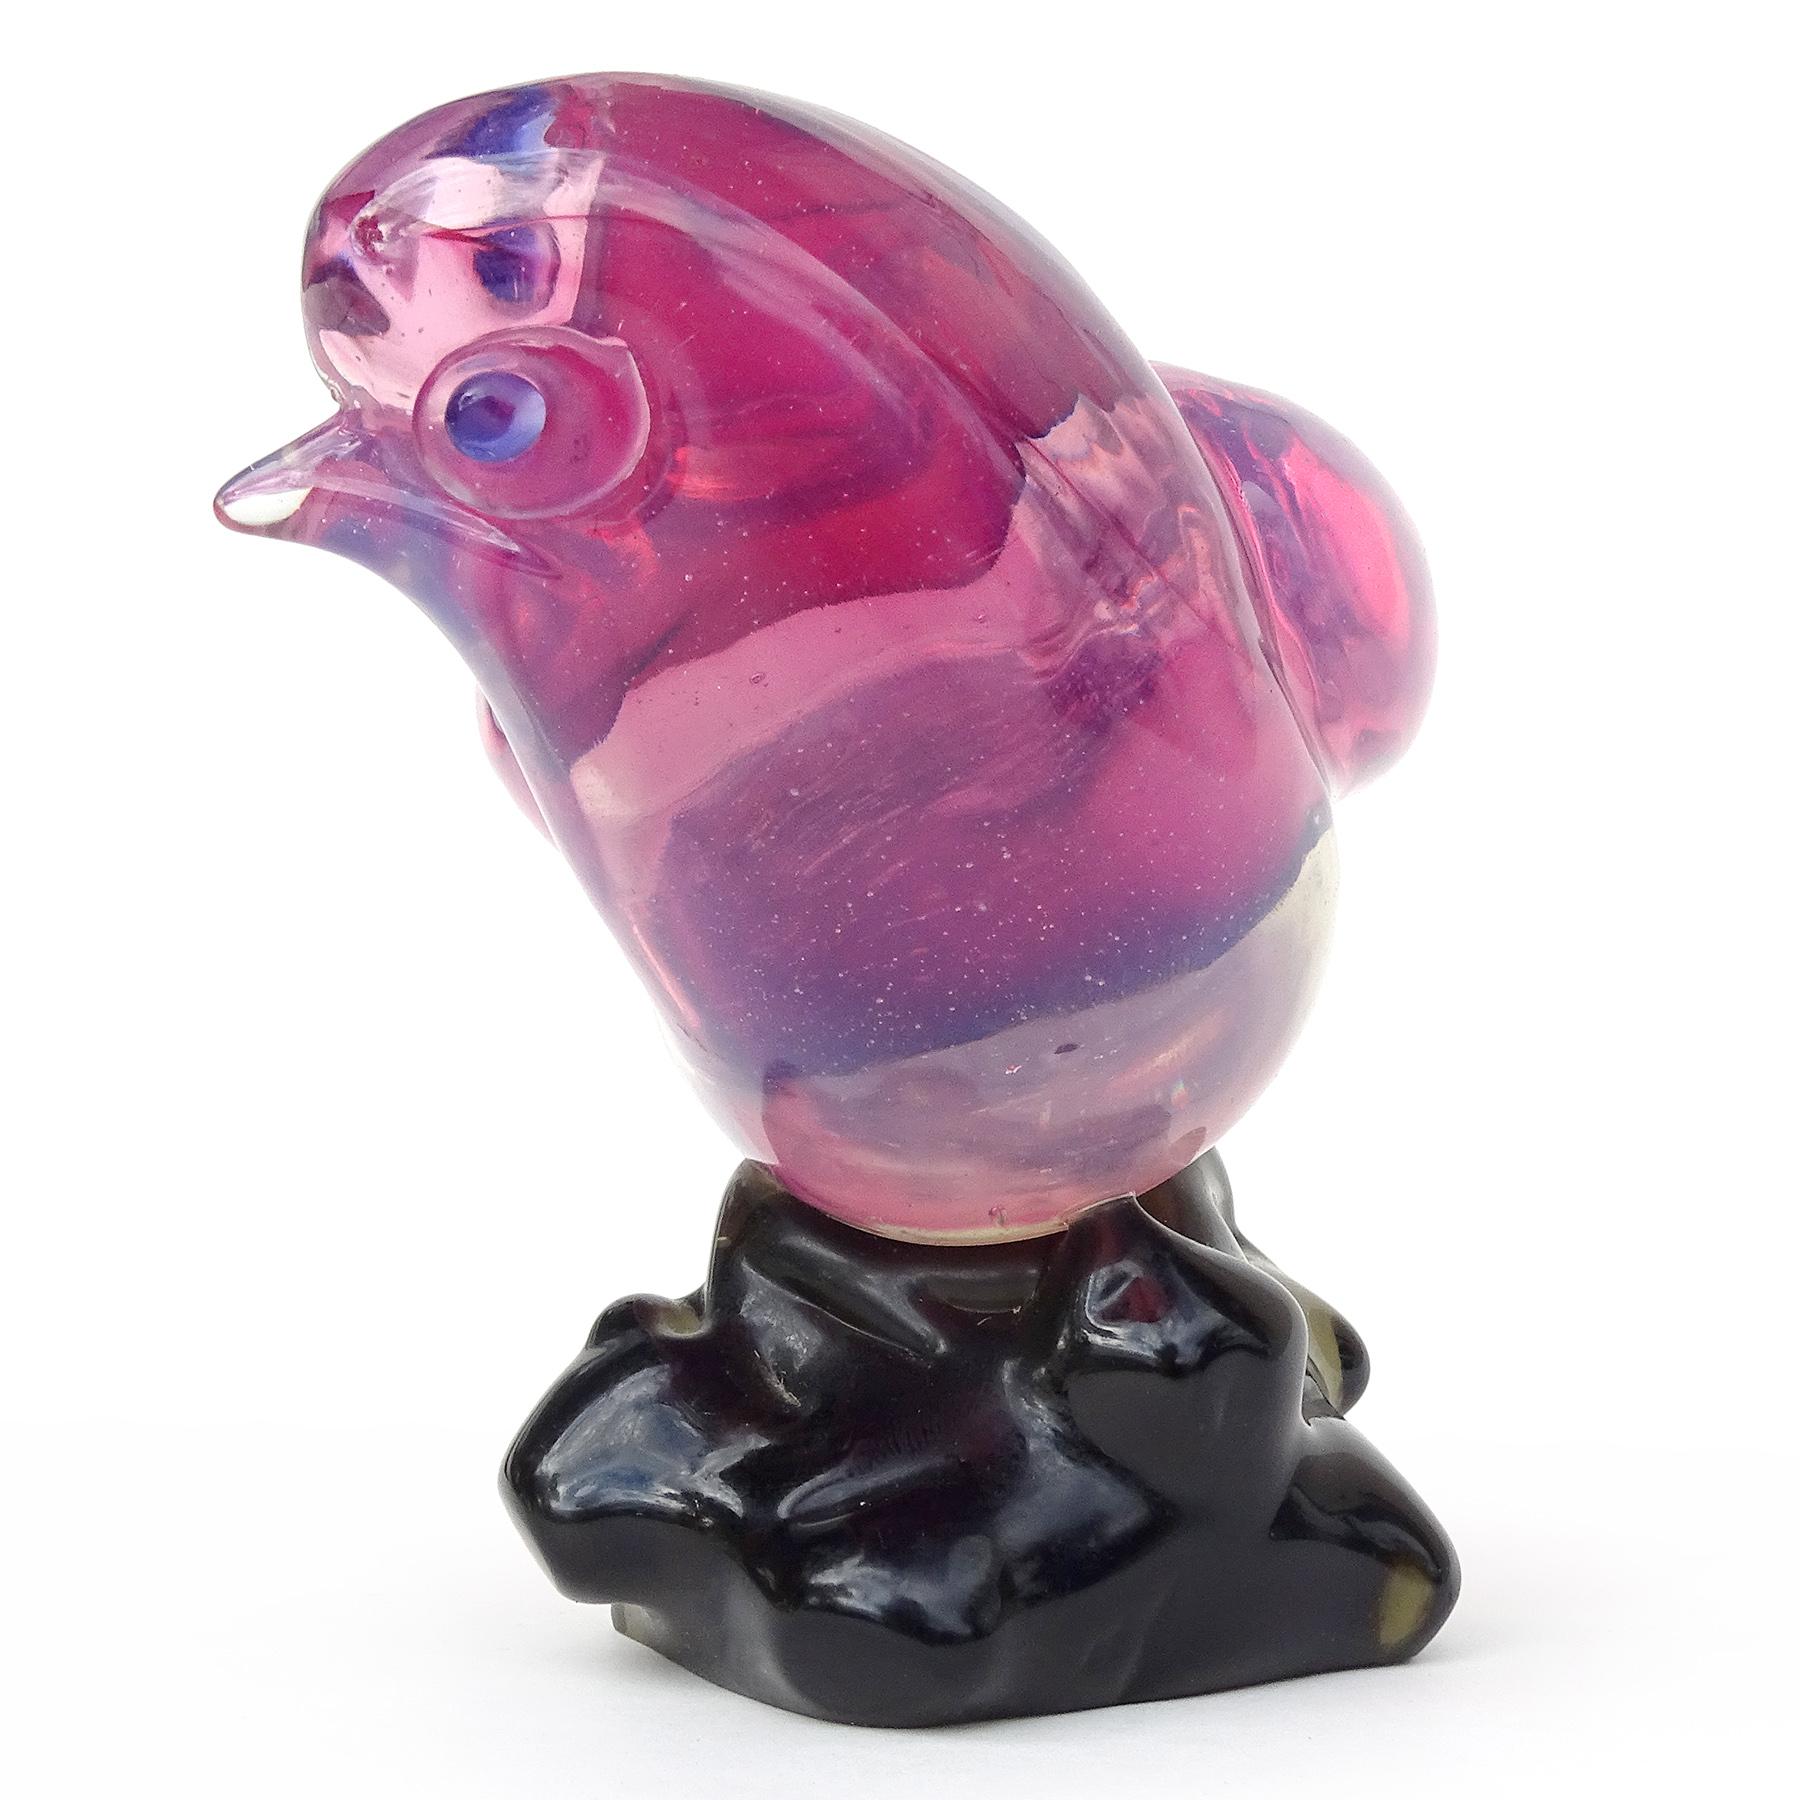 Beautiful vintage Murano hand blown Sommerso opalescent pink and clear Italian art glass bird figurine / sculpture. Documented to the Seguso Vetri d'Arte company, circa 1950s. The cute bird has applied blue eyes, and stands on a black rock base.